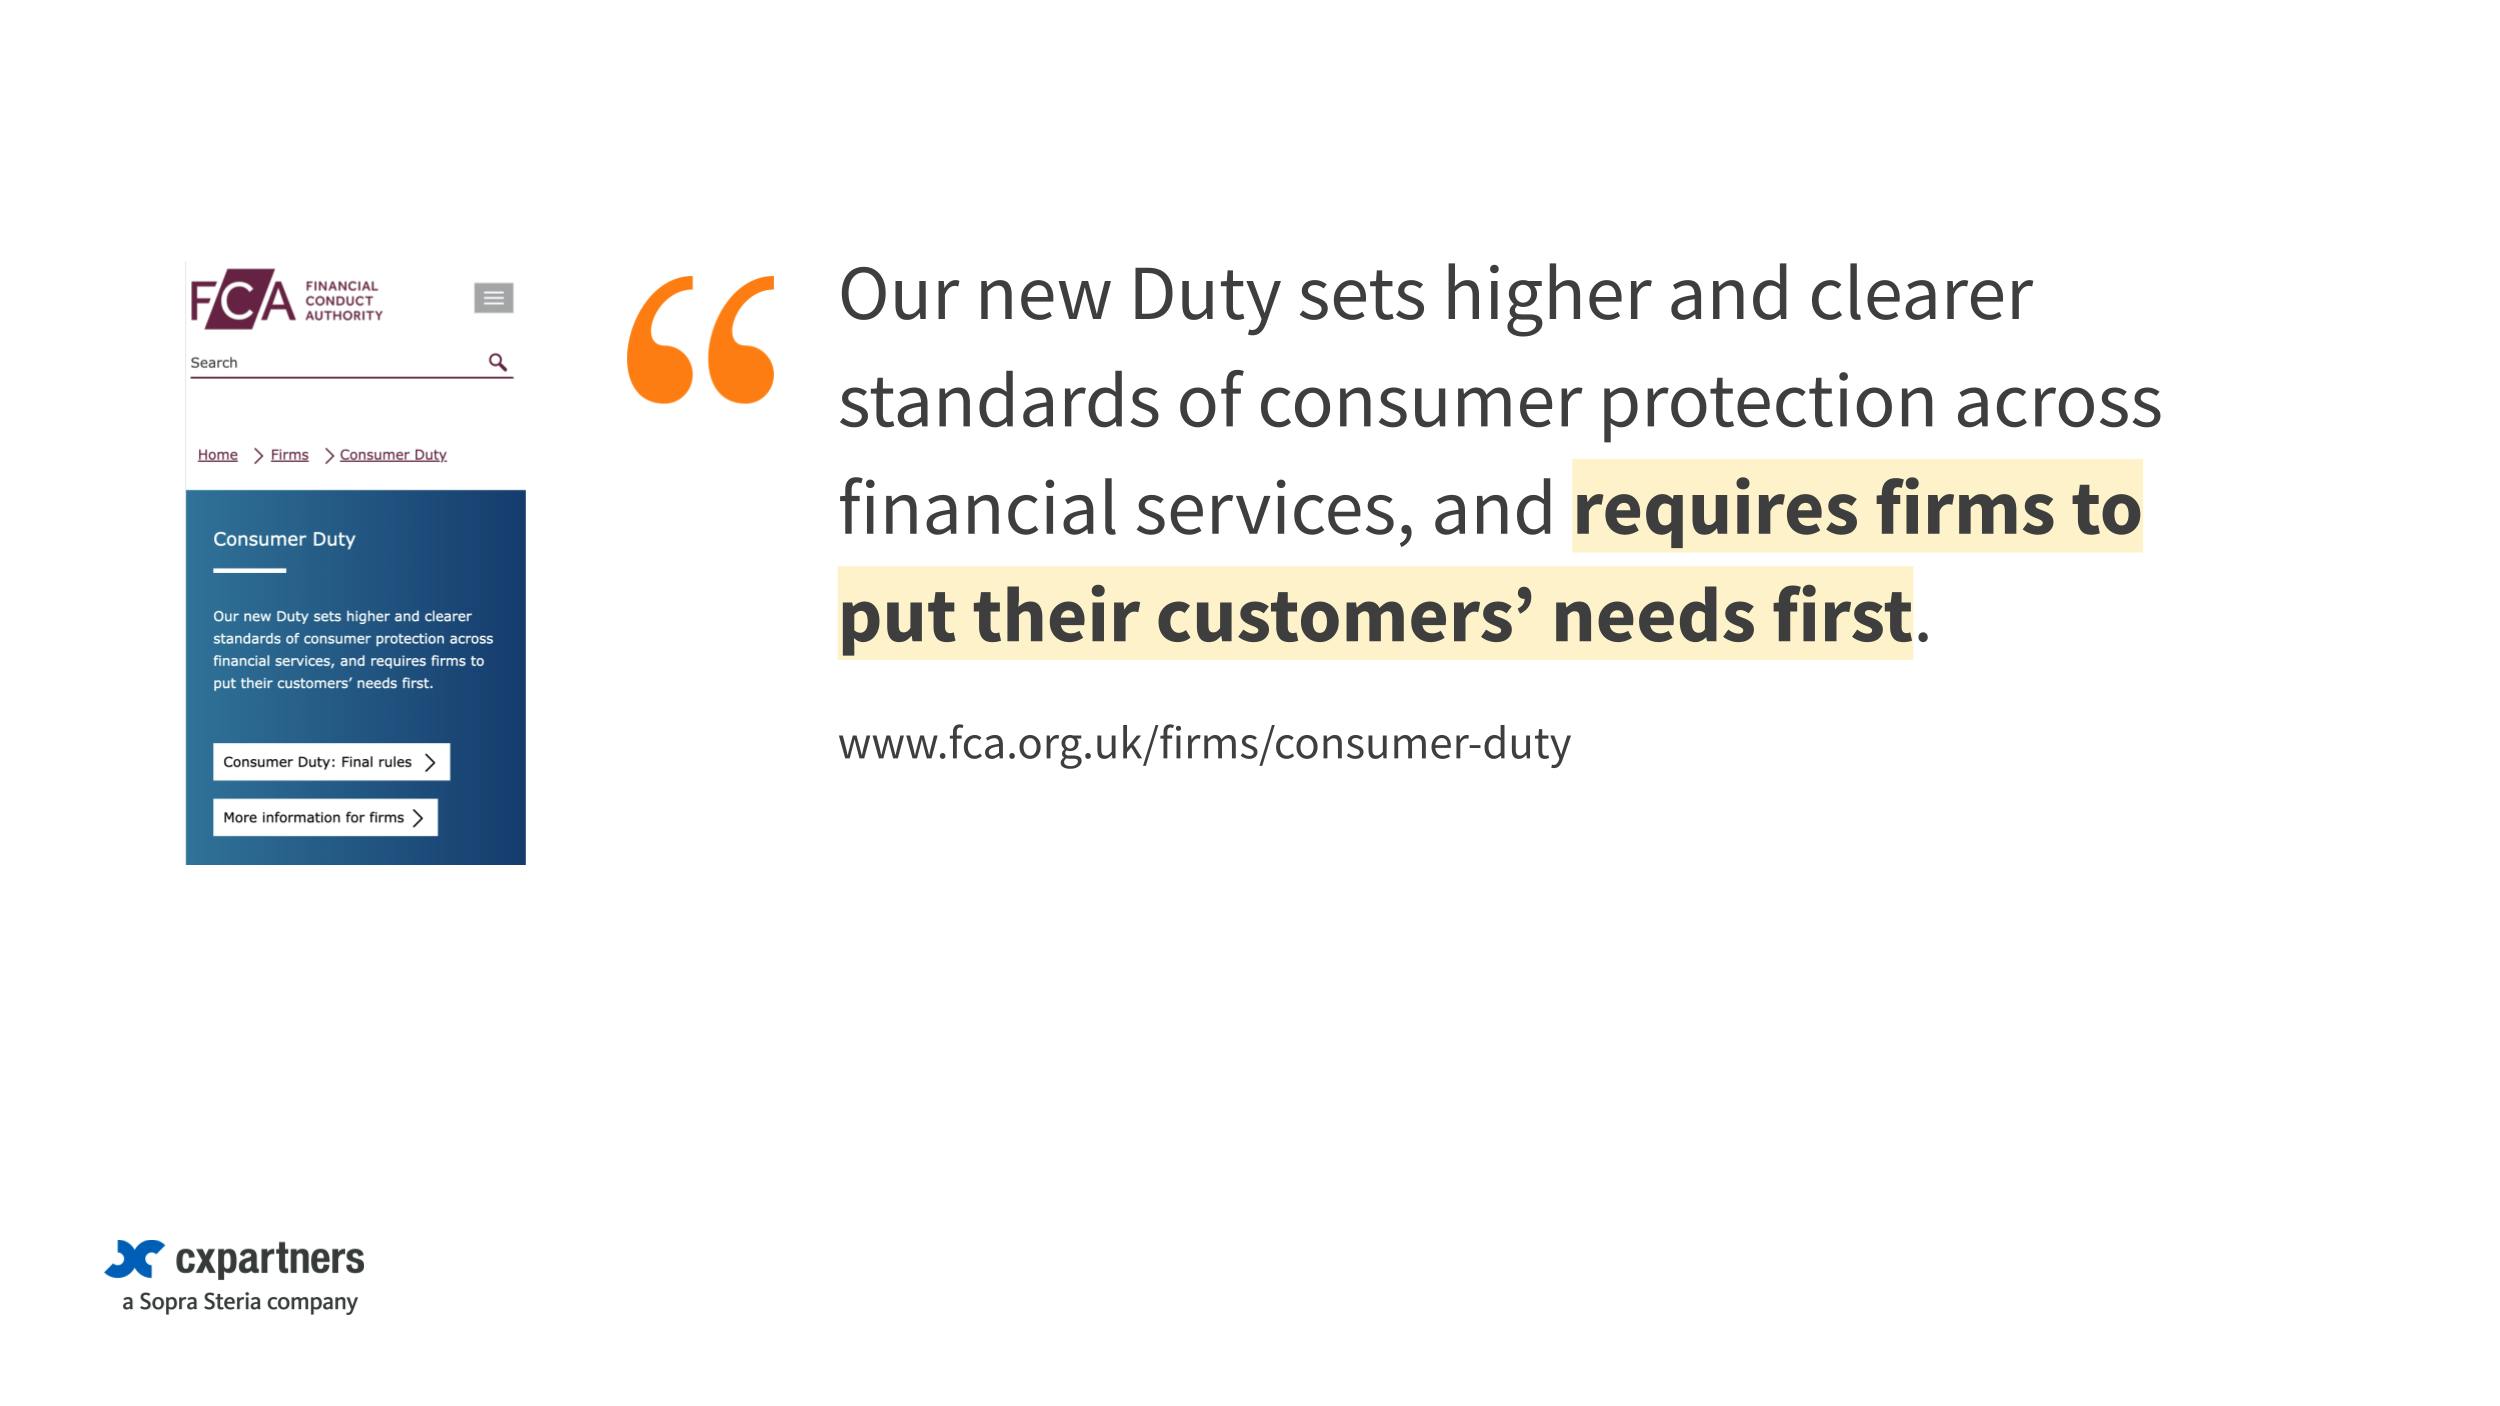 The FCA's Consumer Duty landing page states that: "Our new Duty sets higher and clearer standards of consumer protection across financial services, and requires firms to put their customers’ needs first."